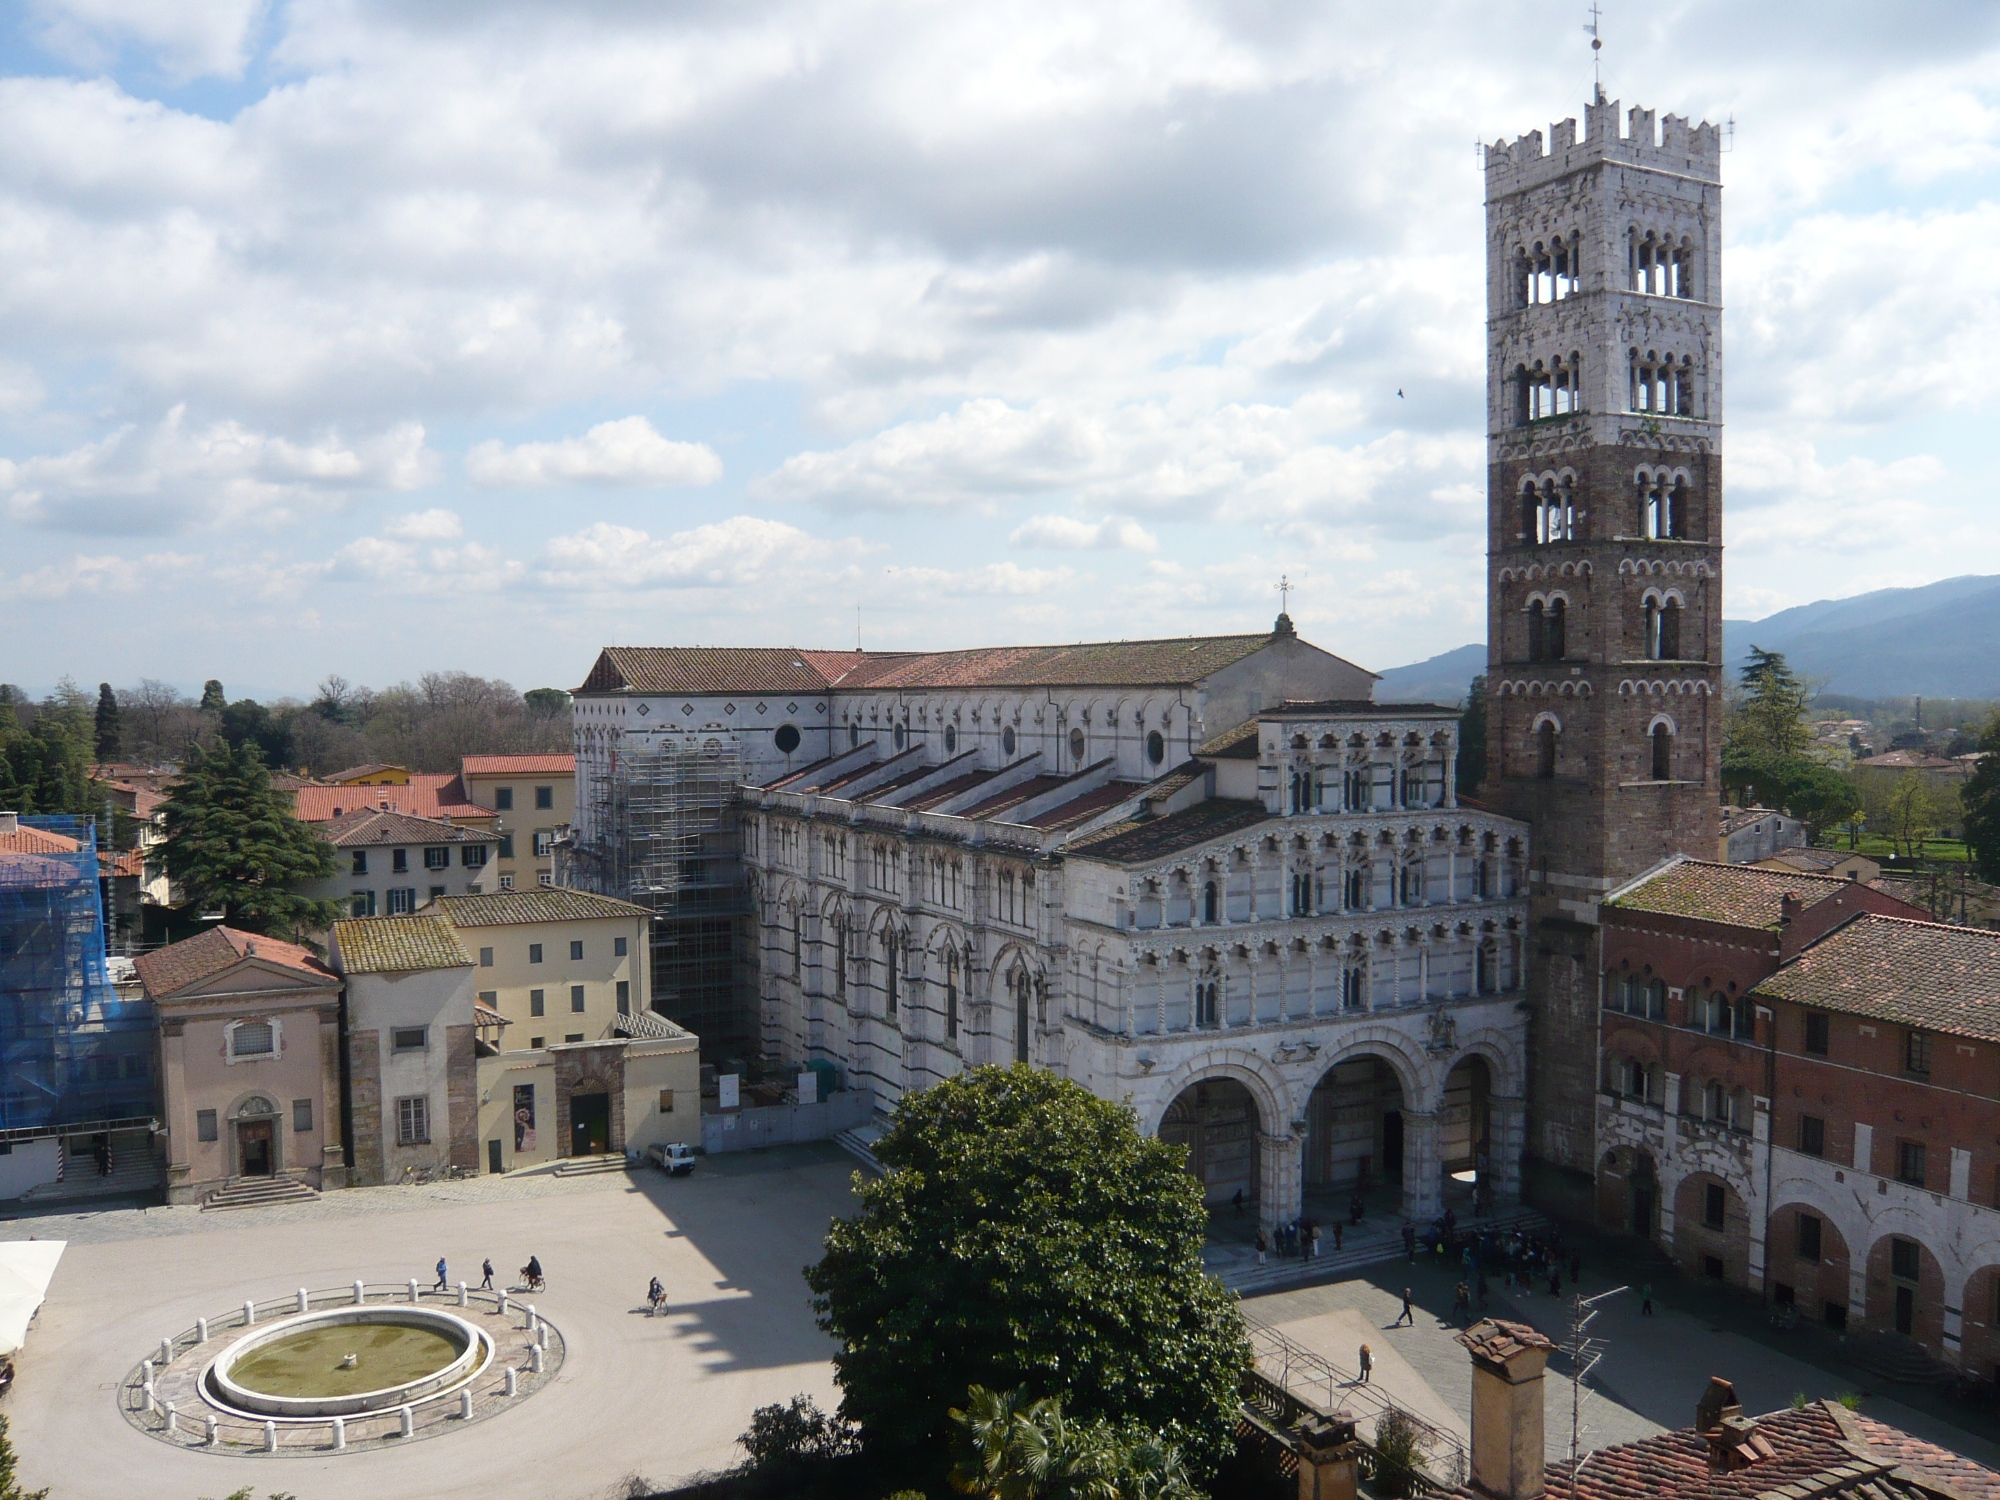 The piazza from above